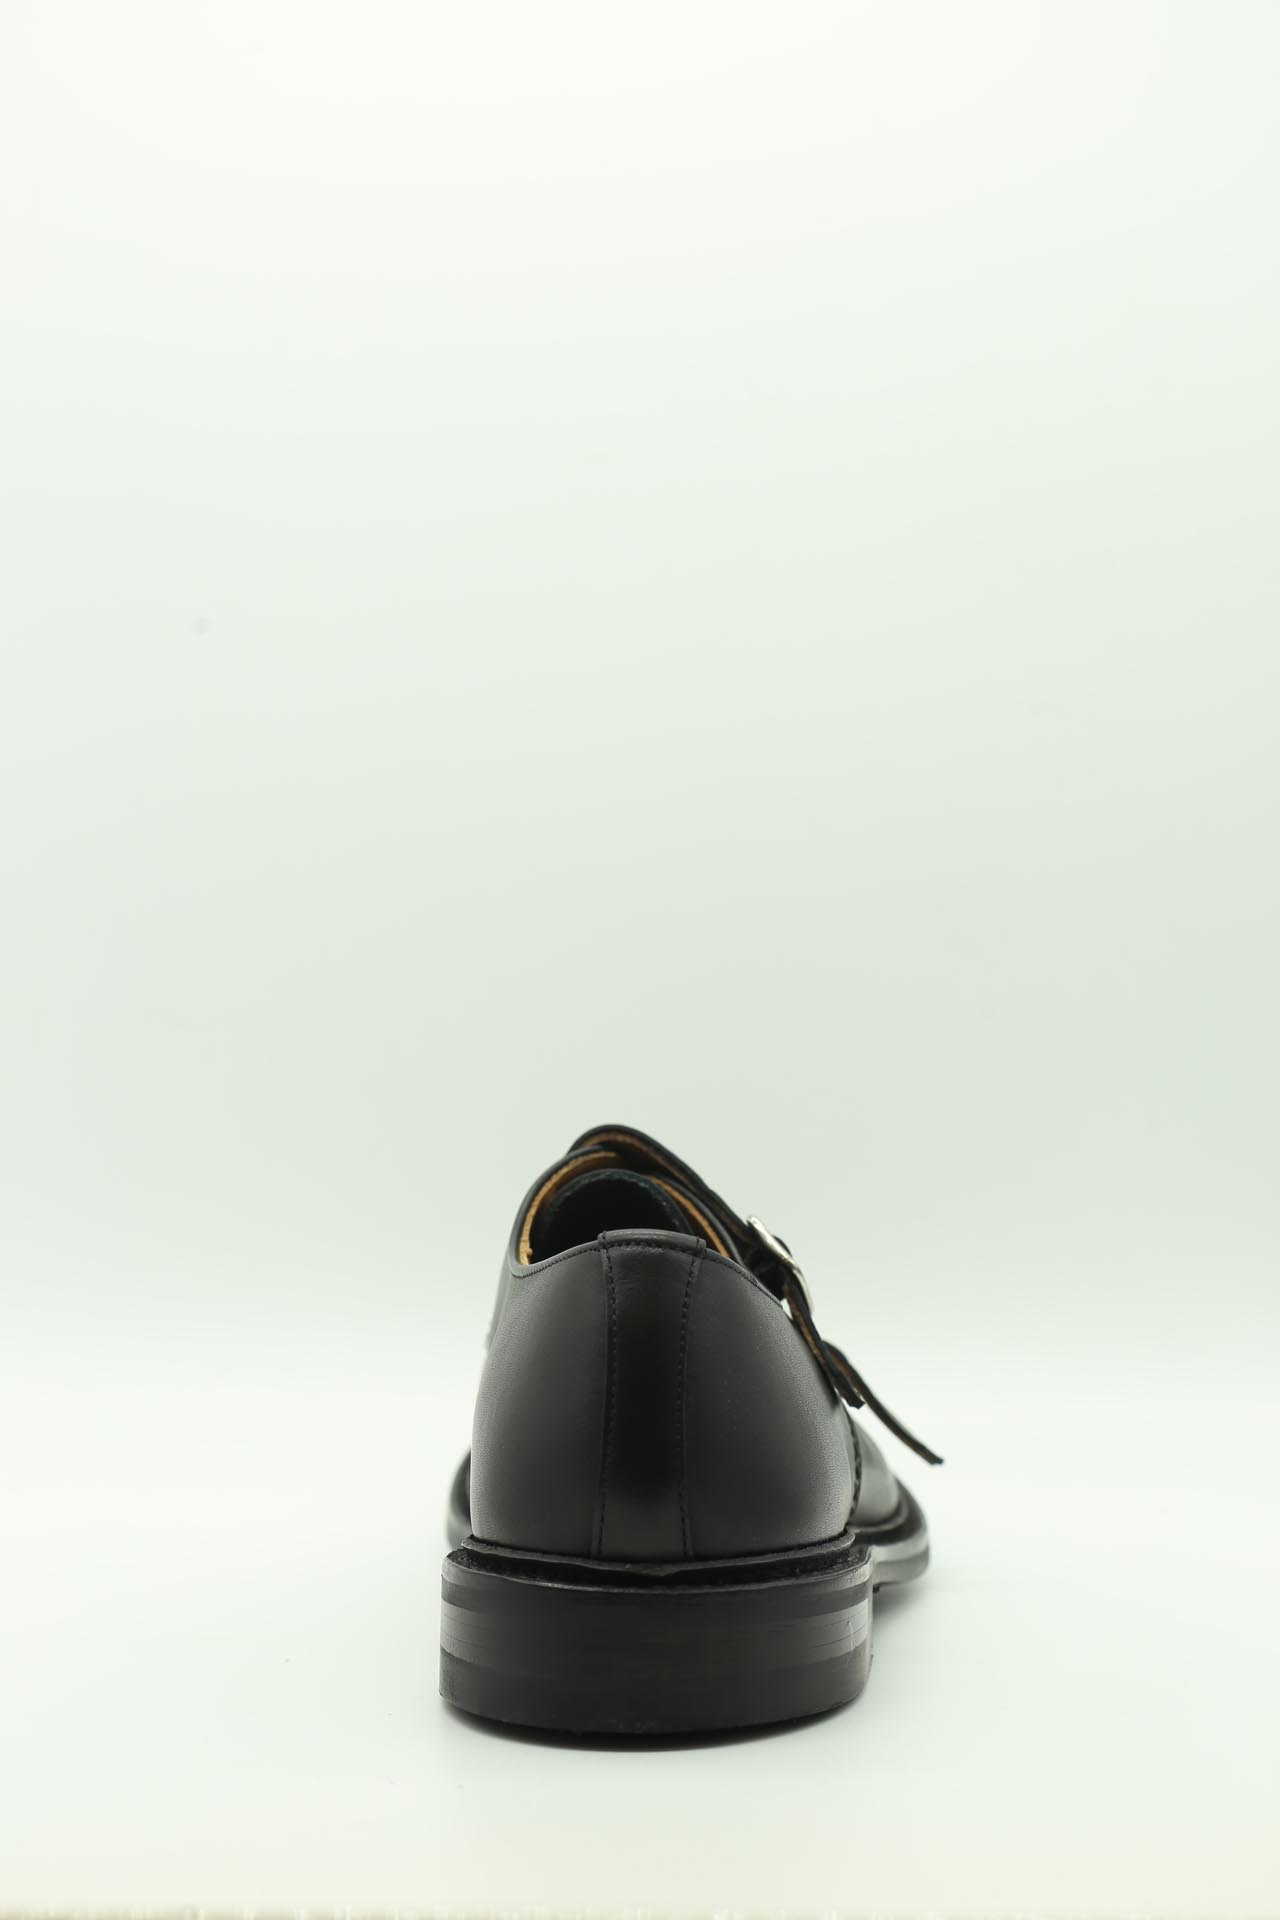 Tricker's, Shoes